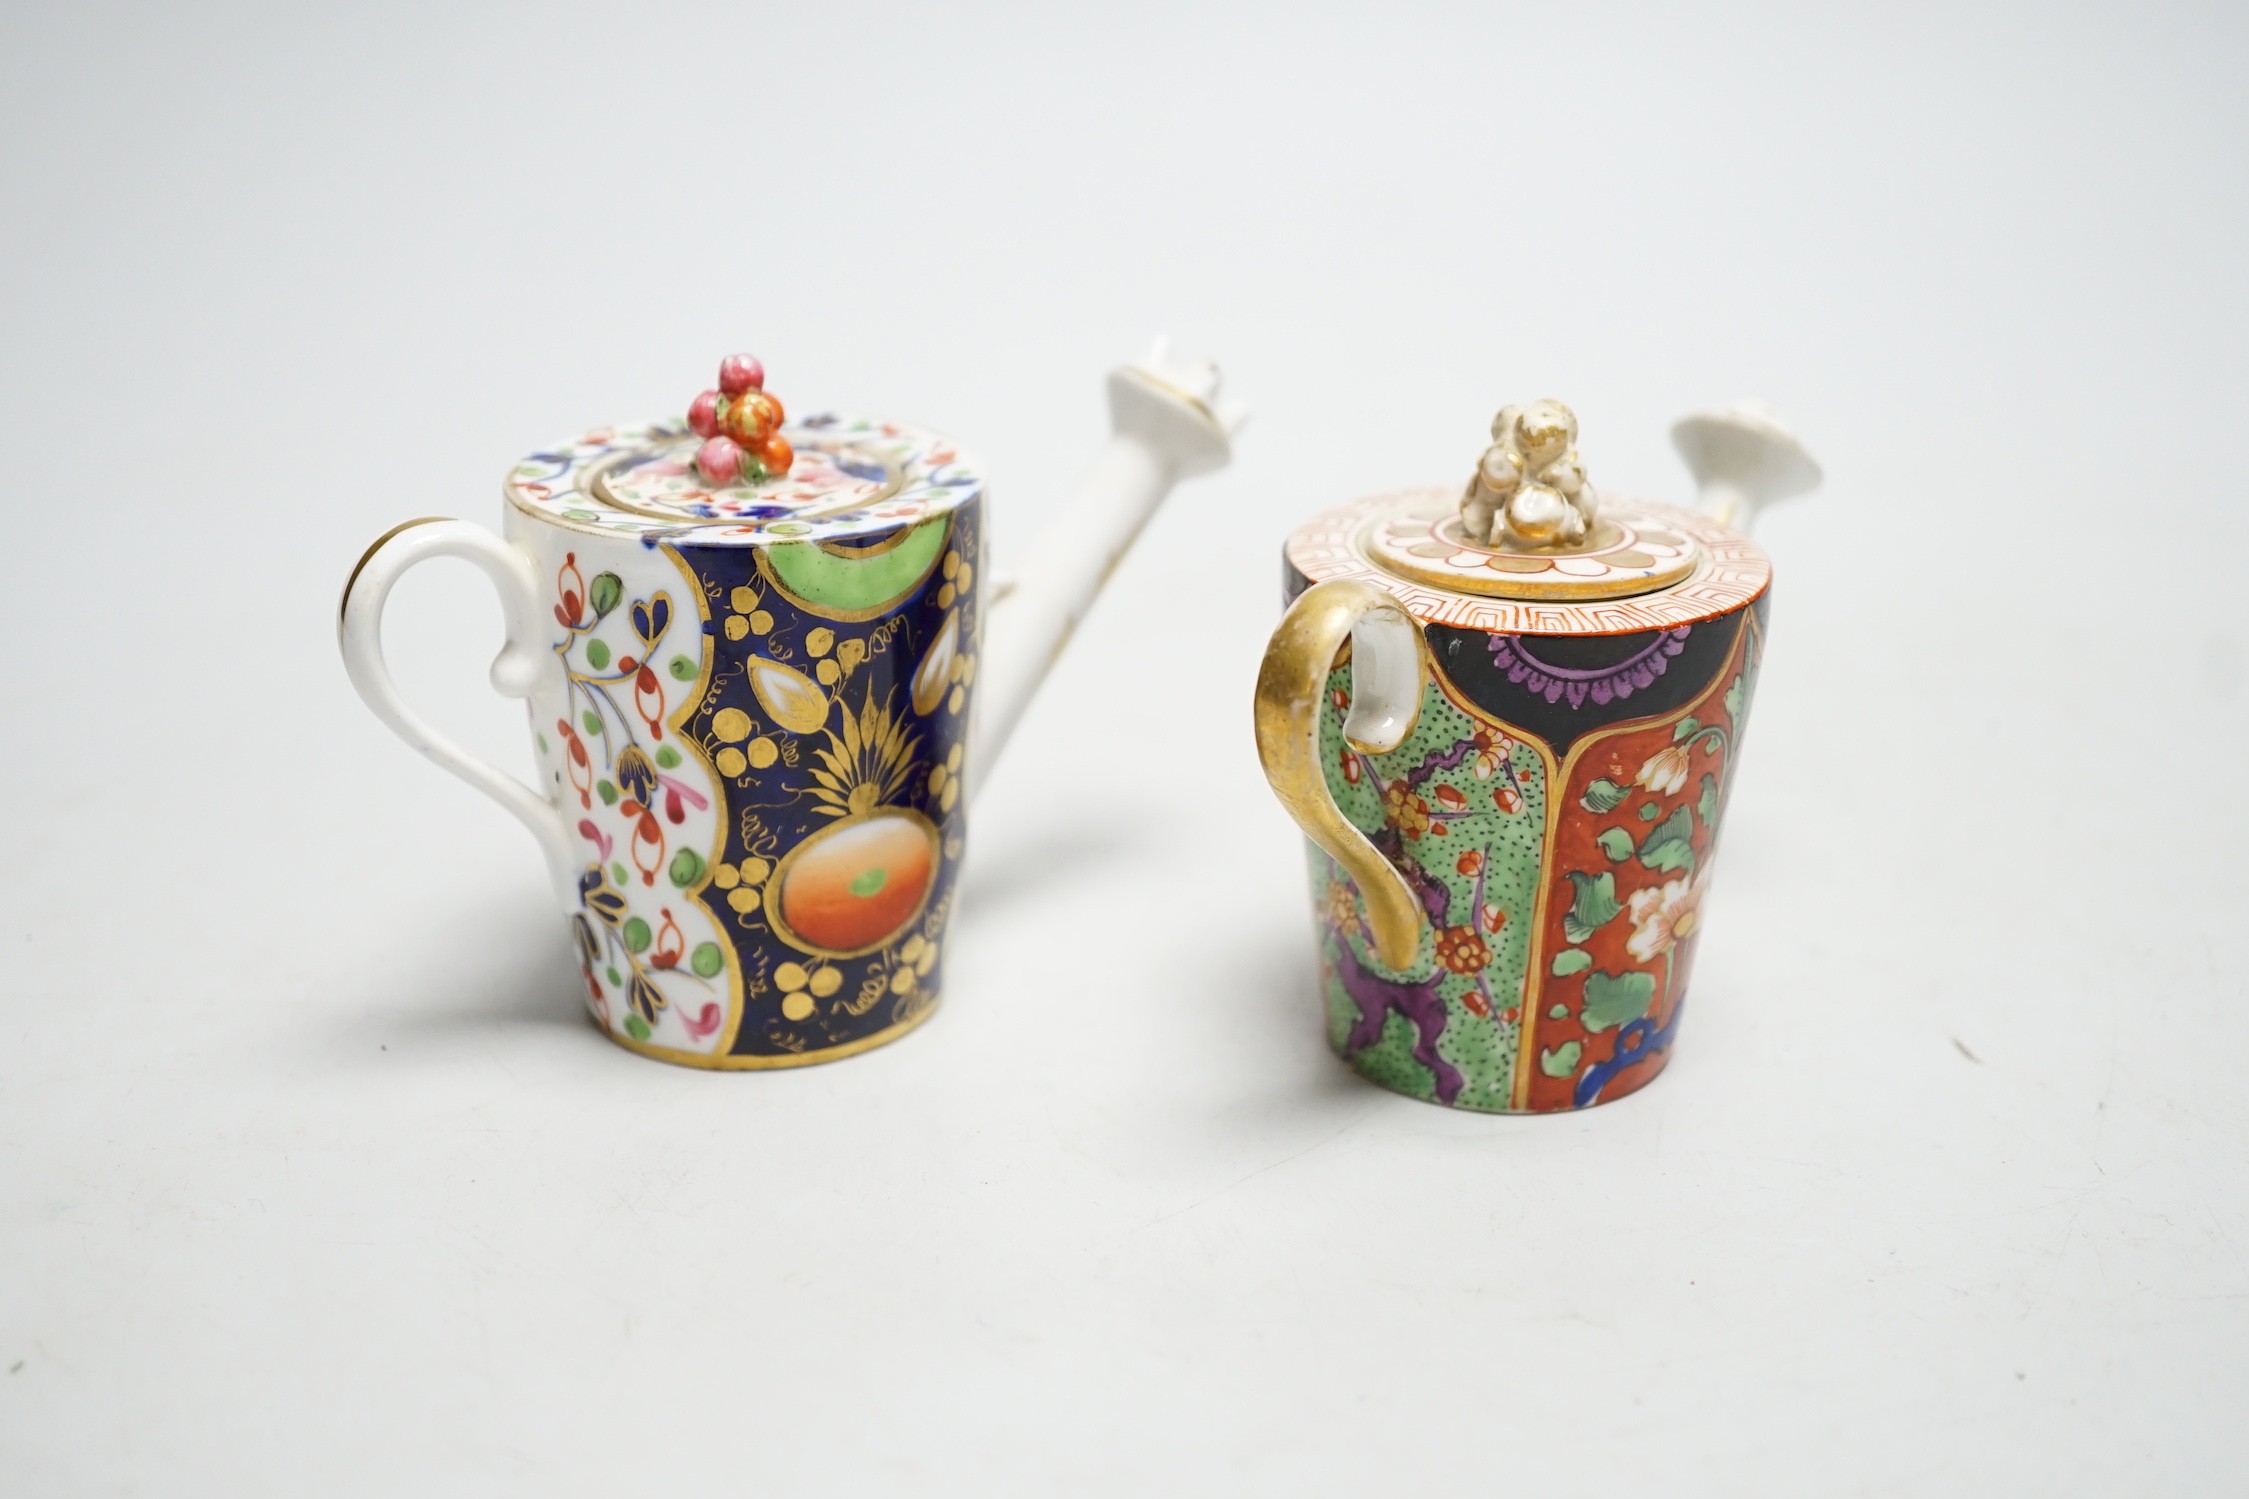 Toy porcelain: Two Derby Japan pattern rosewater sprinklers, c.1815, each modelled in the form of a watering can. 7cm tall